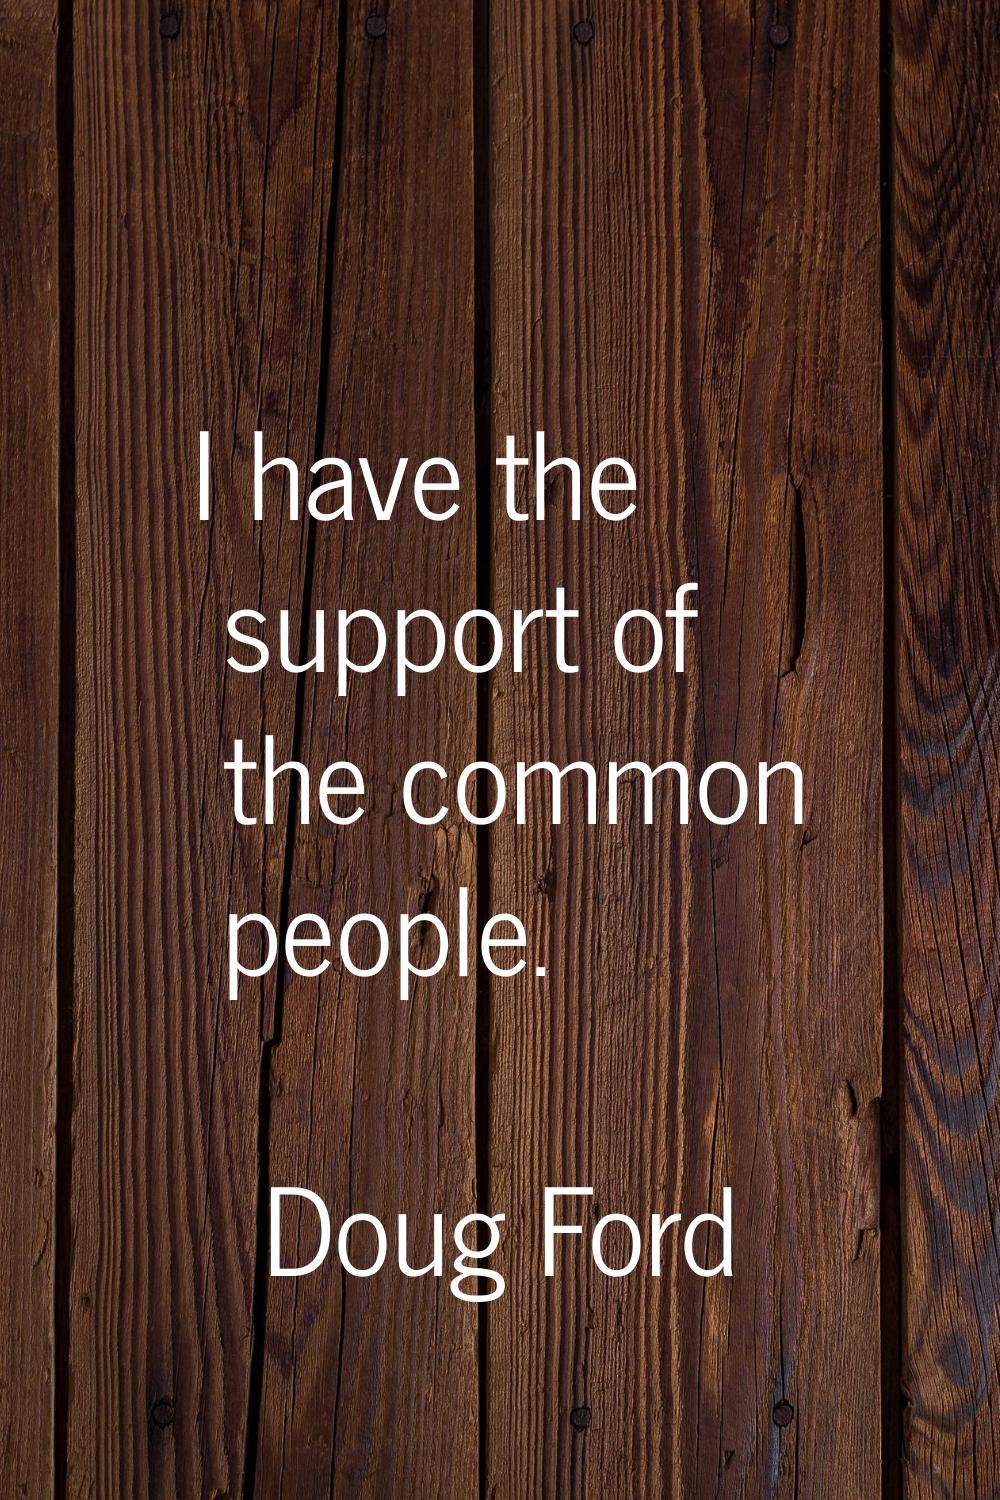 I have the support of the common people.